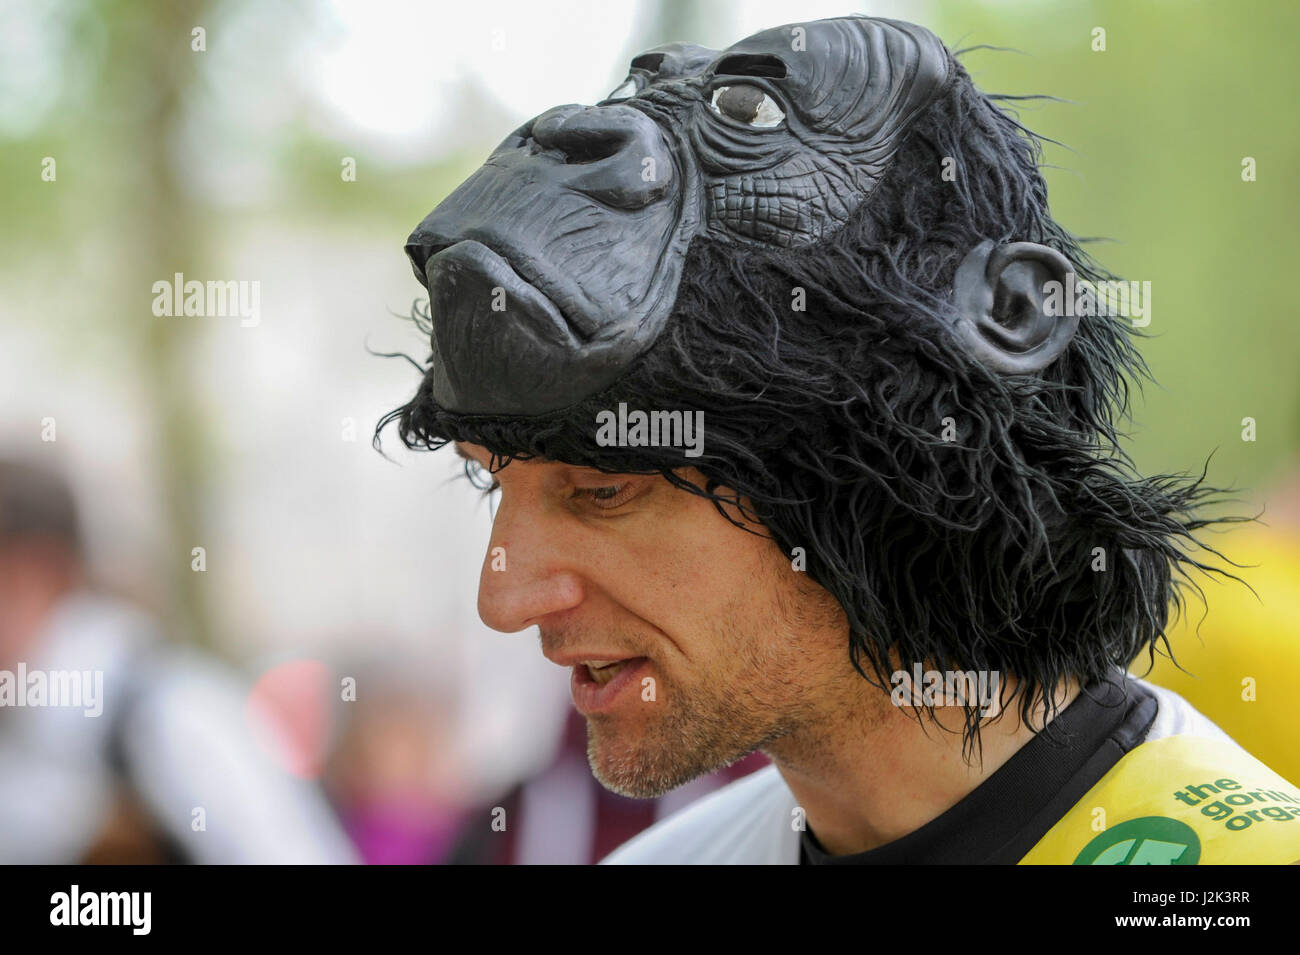 London, UK.  29 April 2017.  Met Police officer Tom Harrison, 41, known as "Mr Gorilla", celebrates after finally completing the London Marathon after six days of crawling and raising £23,900 for The Gorilla Organisation.   Credit: Stephen Chung / Alamy Live News Stock Photo